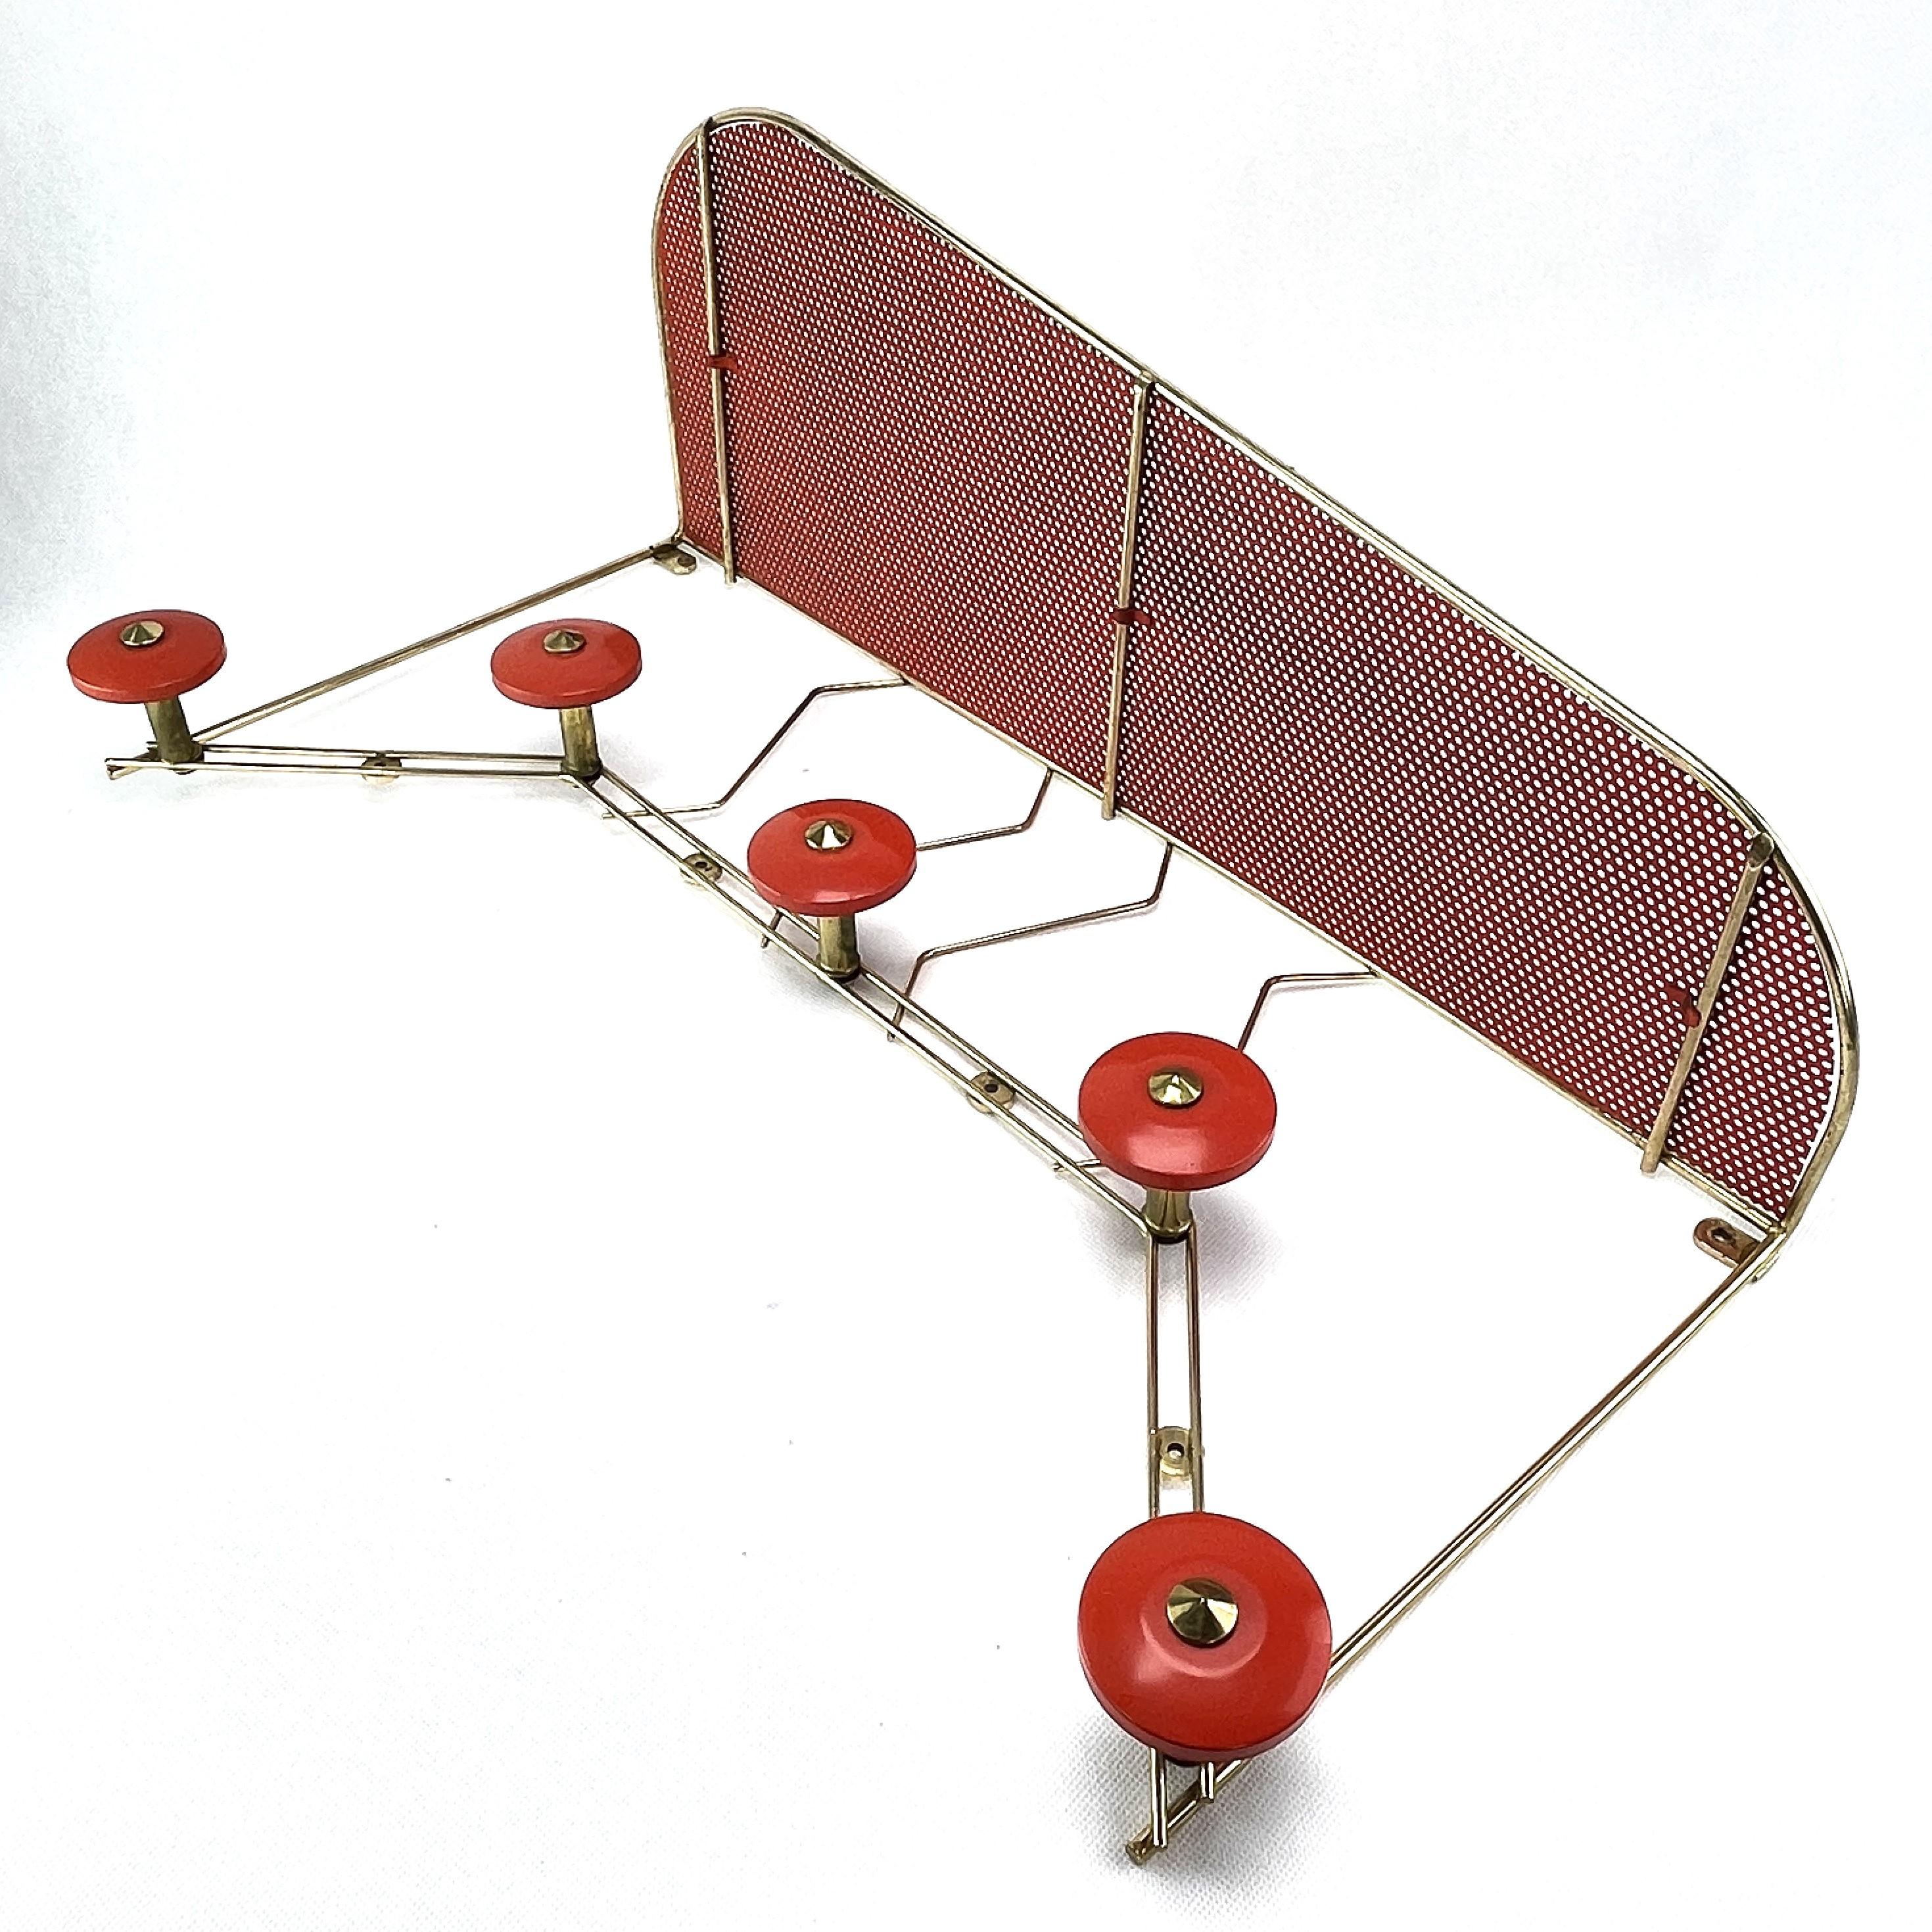 Wall coat rack rockabilly- 1950s.

The french wall coat rack is out of the 1950s period. The wardrobe is an original of its time and it still impresses with its beautiful shape in the Rockabilly style.

The red and gold wardrobe weights 1.9 kg /